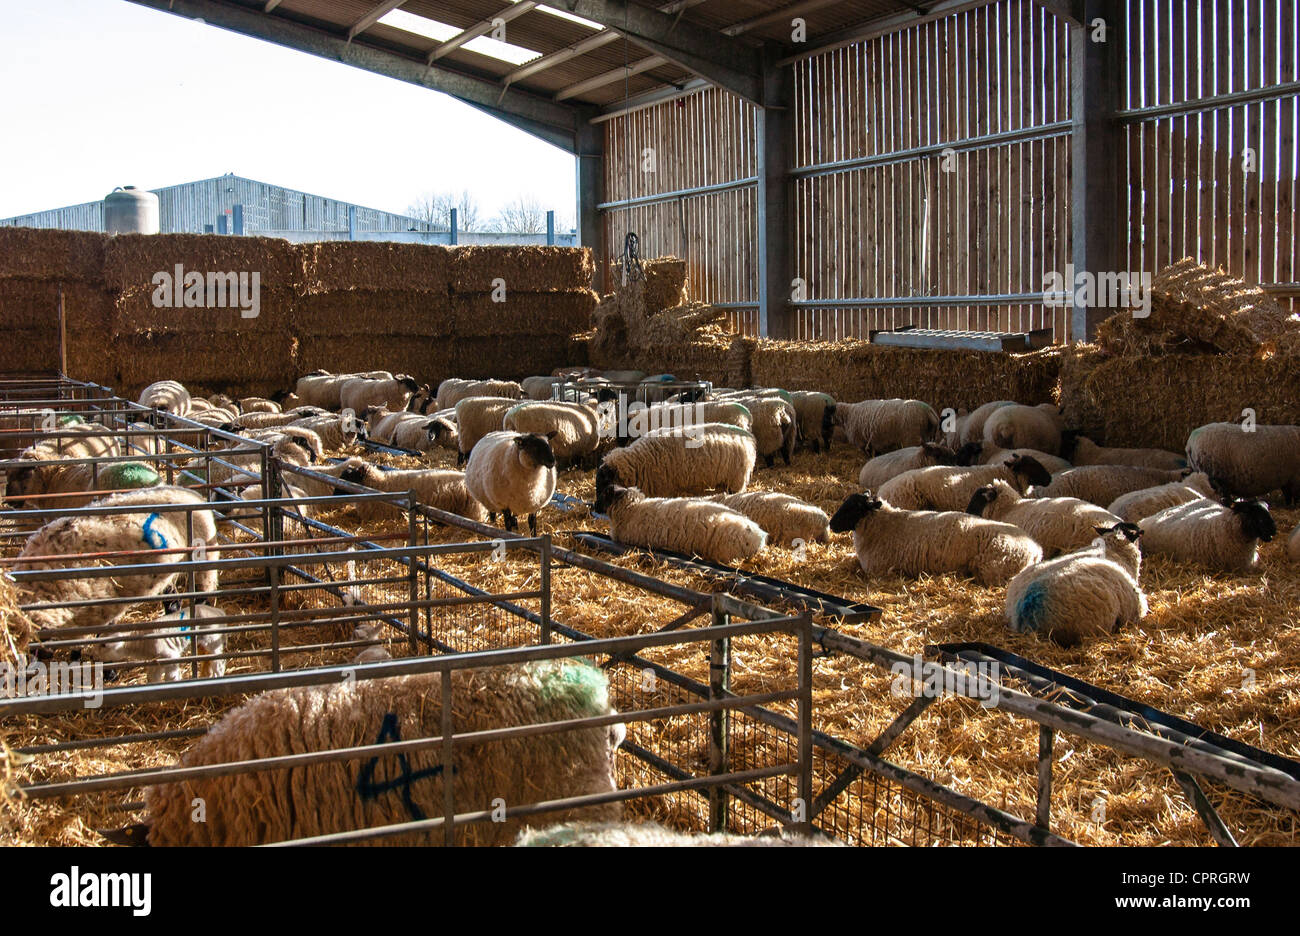 Sheep in winter quarters bedded on hay during lambing season at Sparsholt Agriculture College near Winchester in Hampshire. Stock Photo